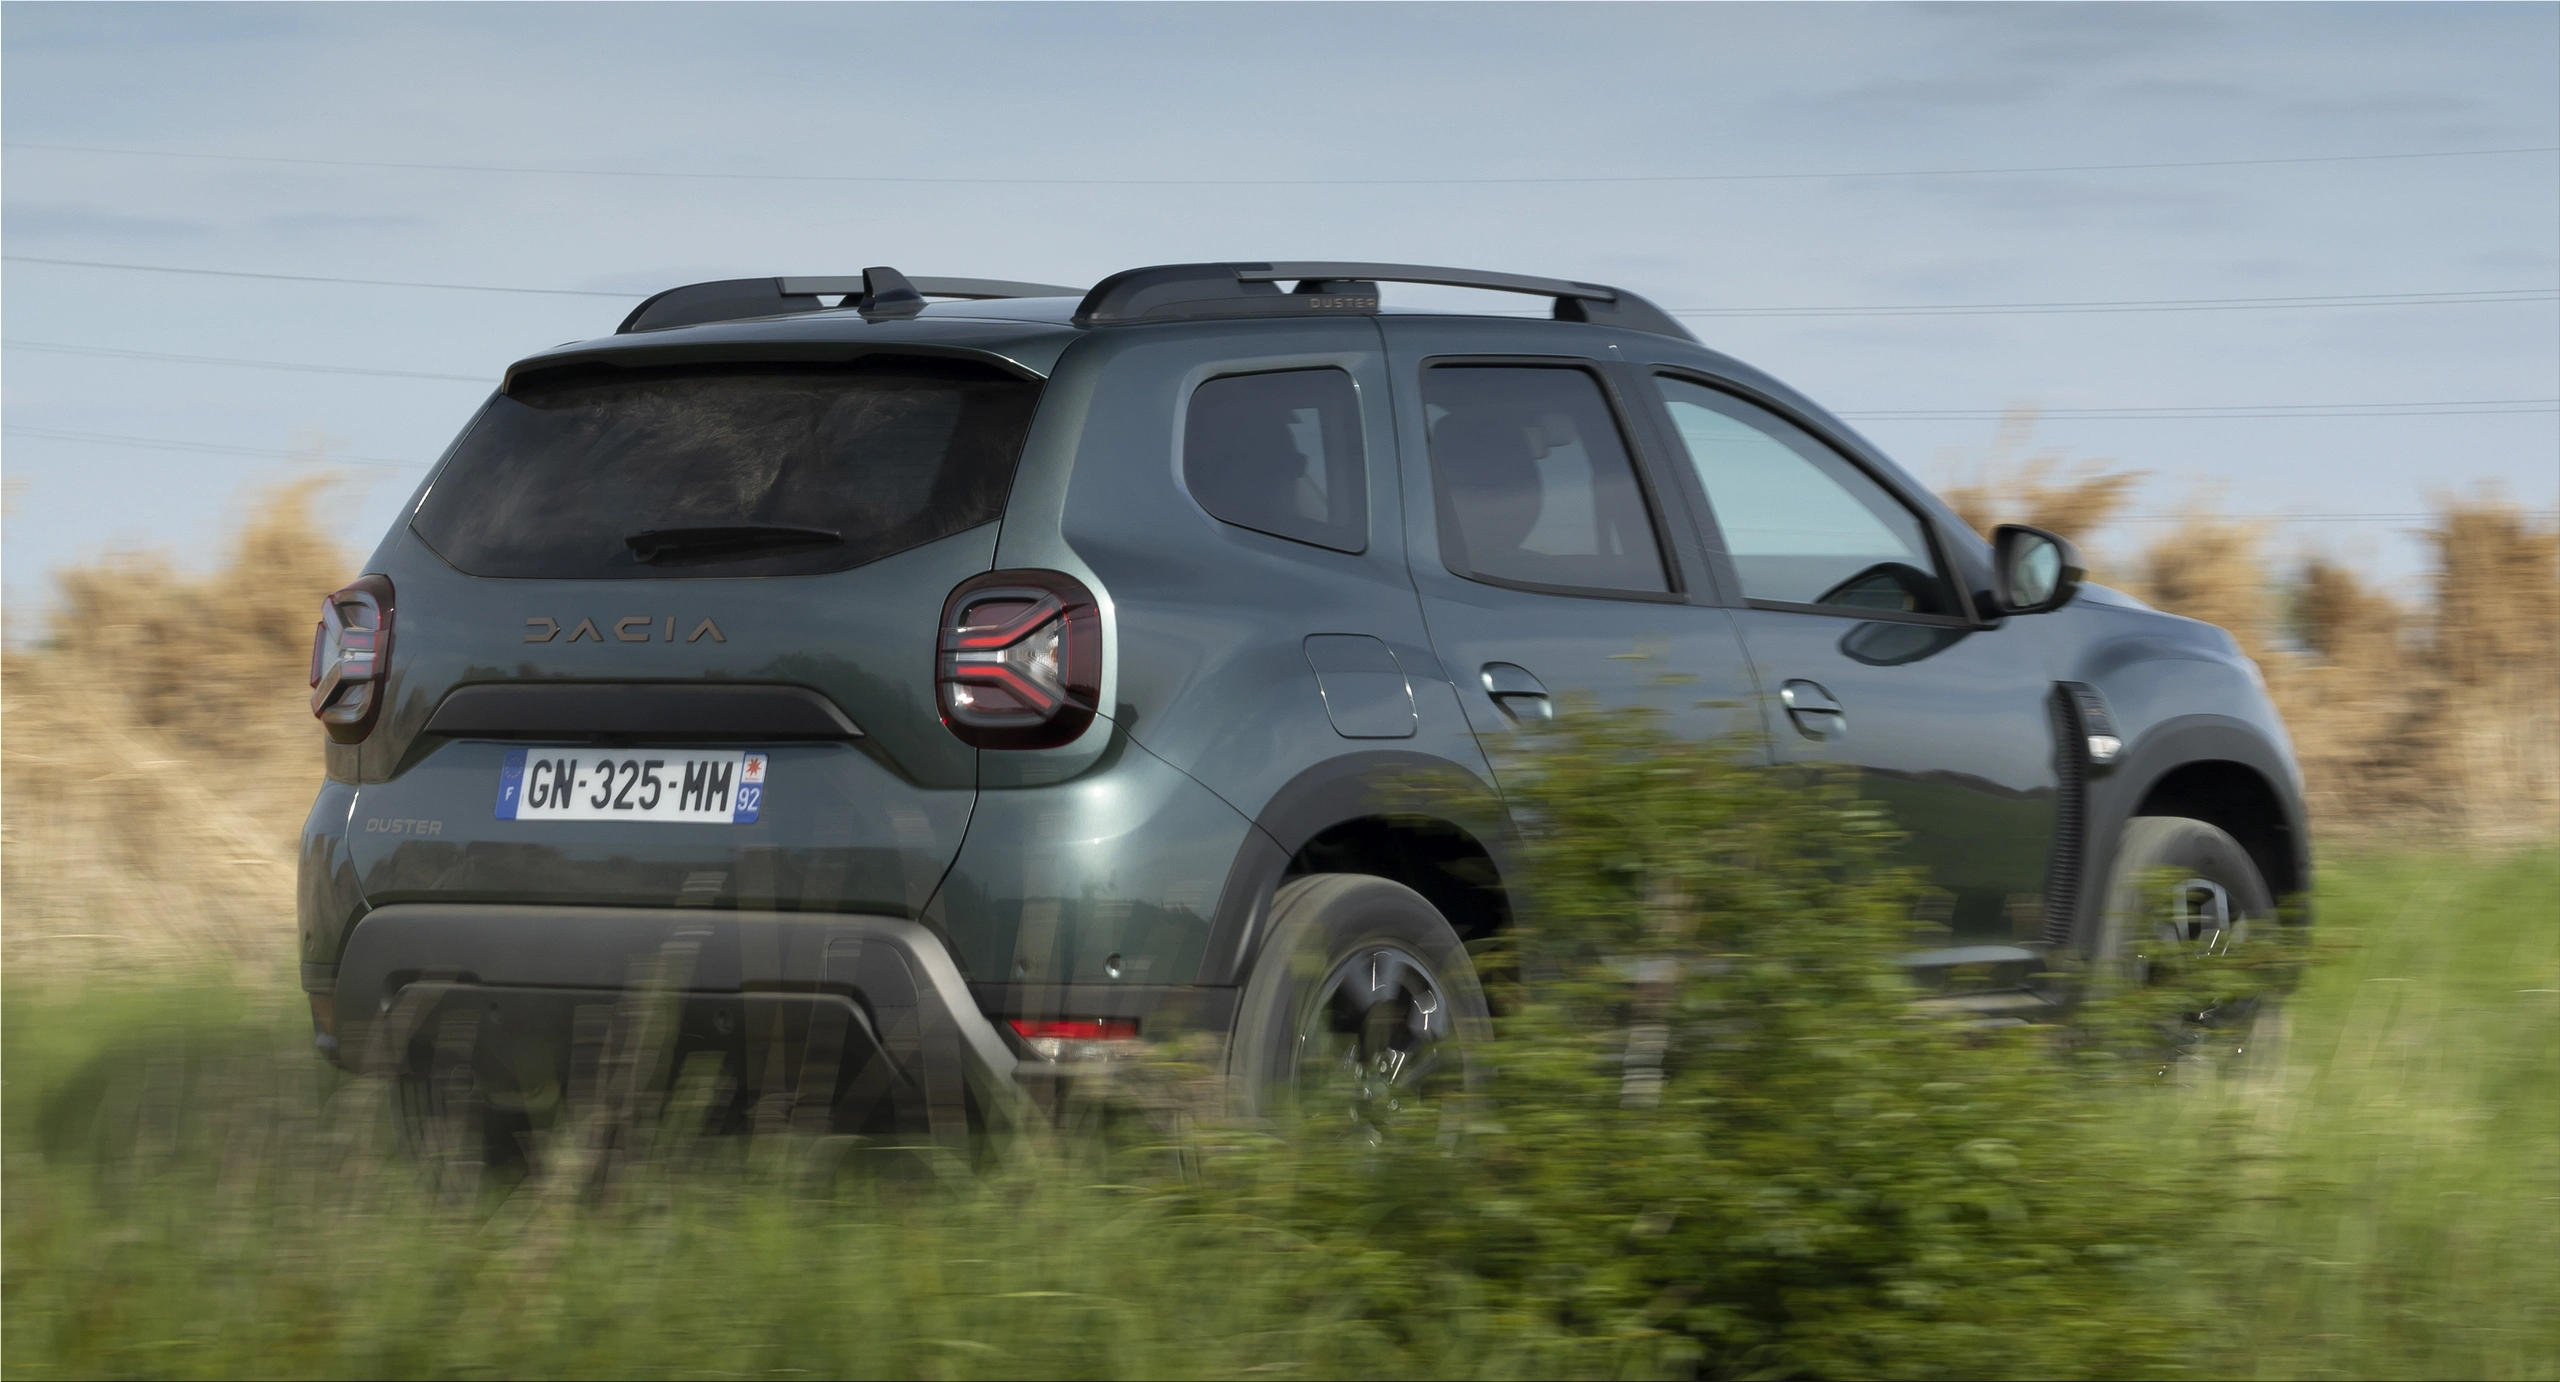 Dacia Duster Extreme: A Budget-Friendly SUV for Off-Road Enthusiasts